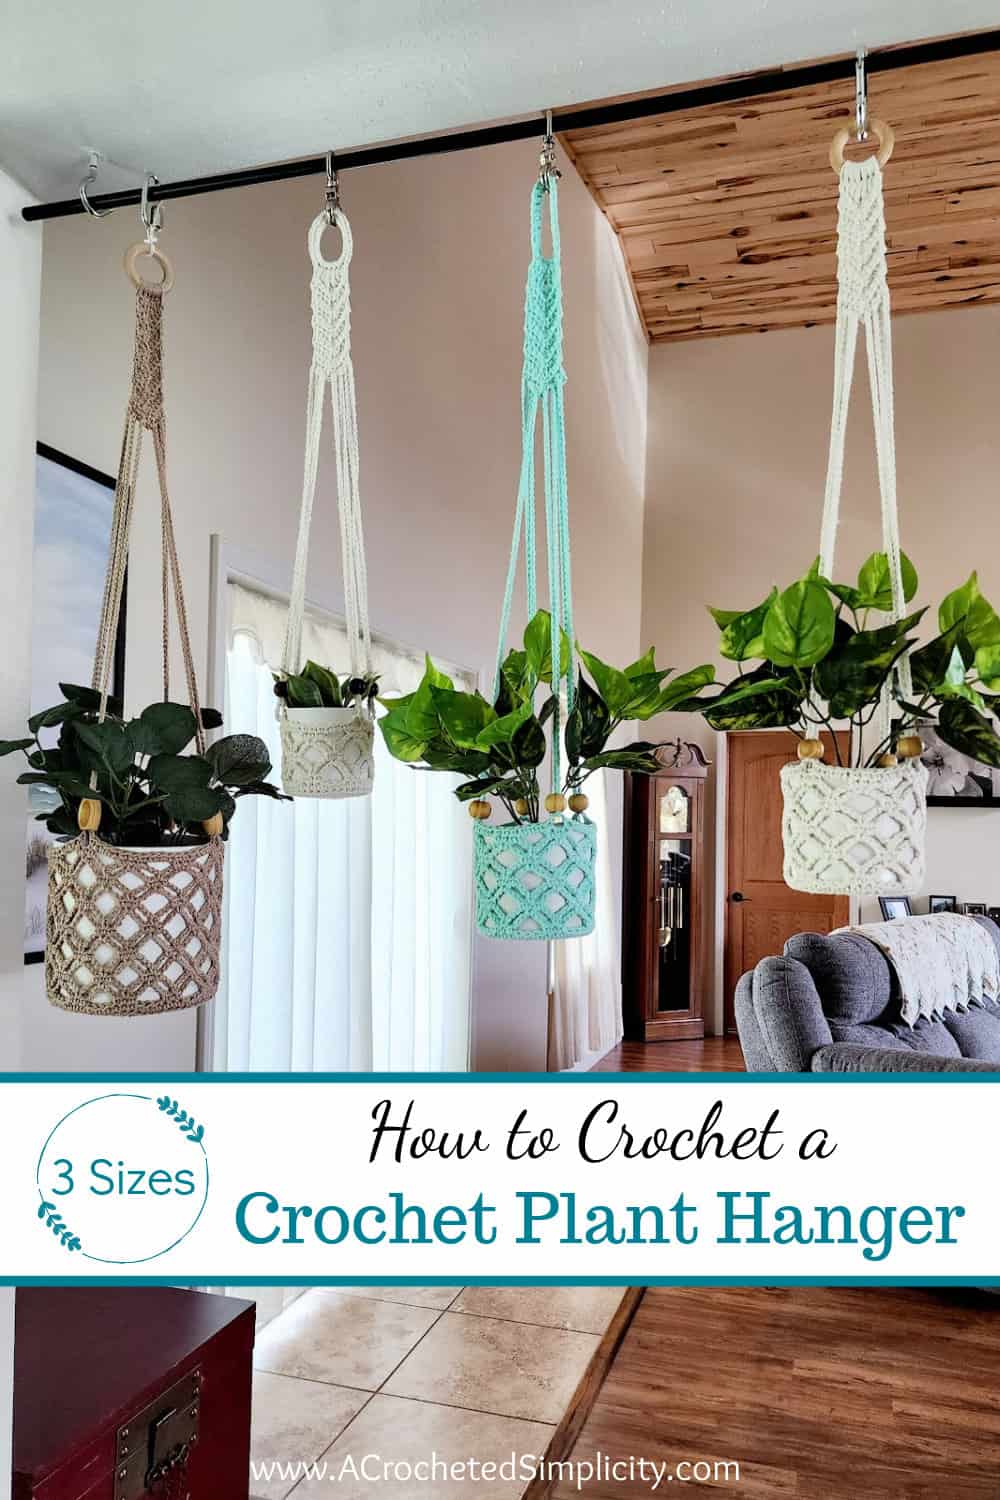 This photo shows 4 different crochet plant hangers in different colors and sizes.